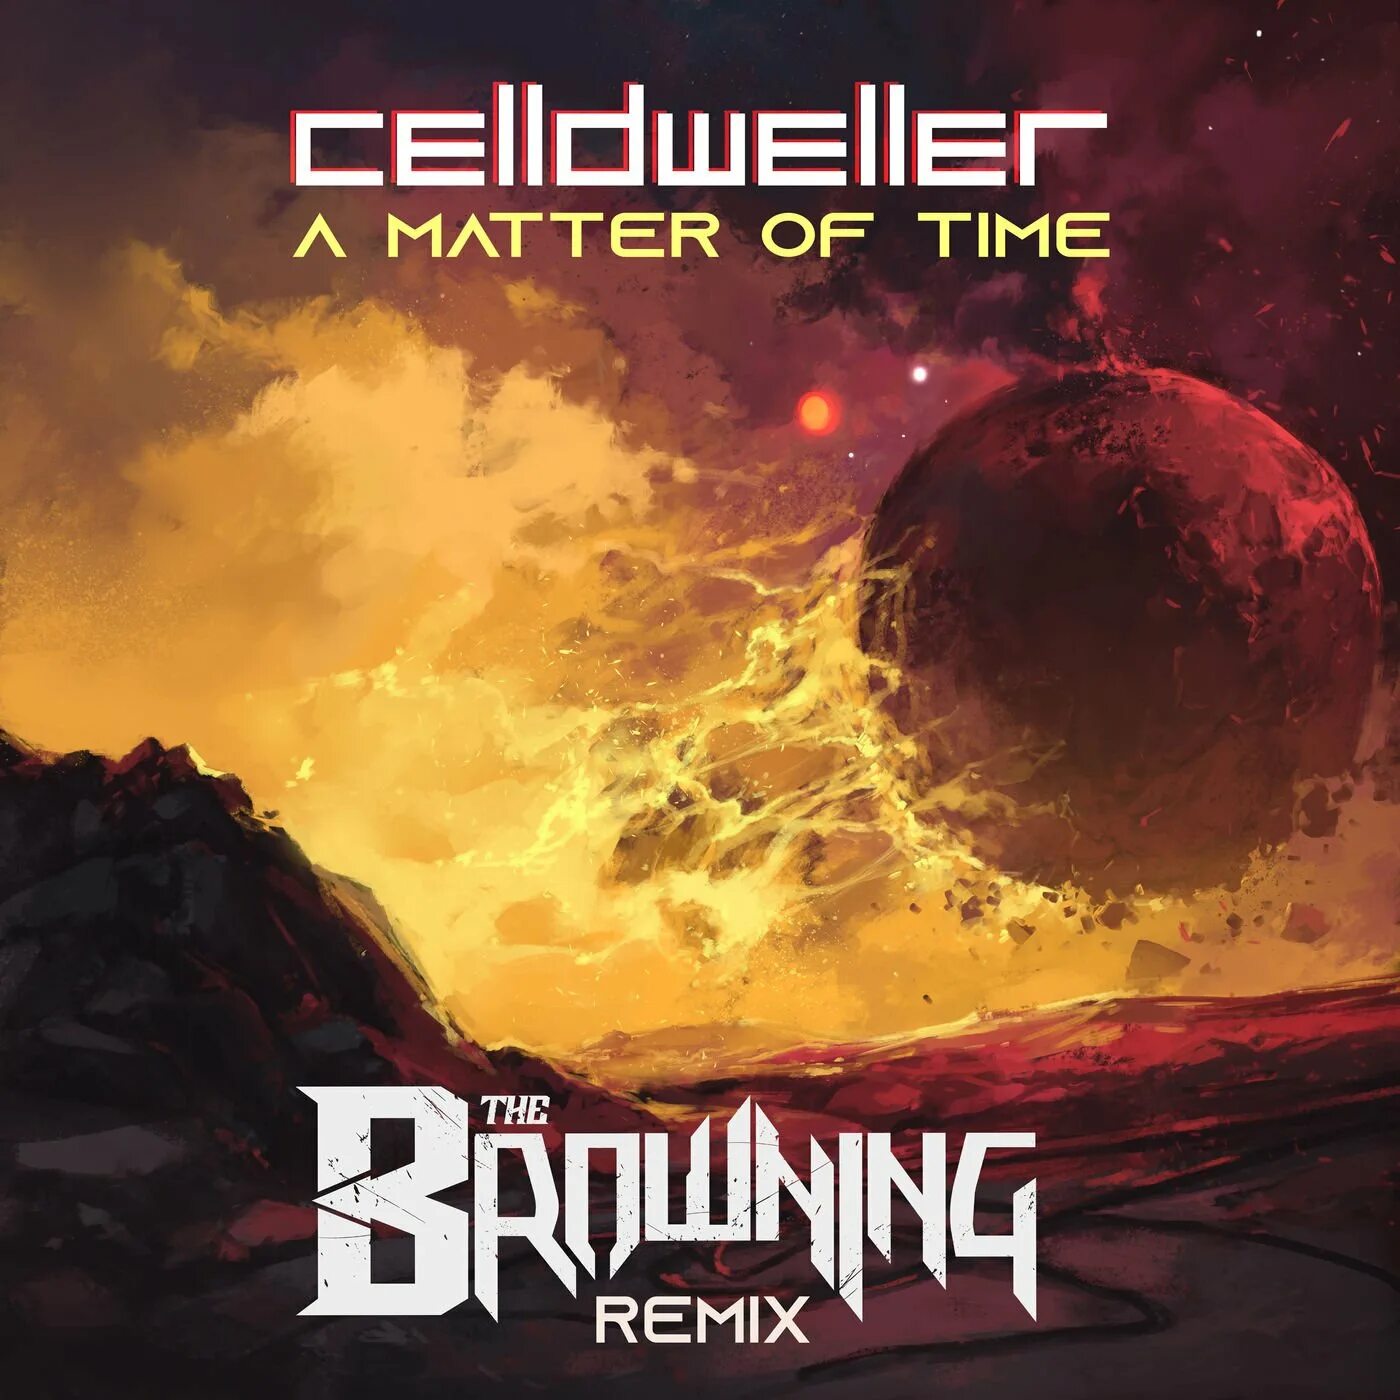 The browning time. Celldweller. Celldweller matter of time. Celldweller album. Celldweller - a matter of time (2019).